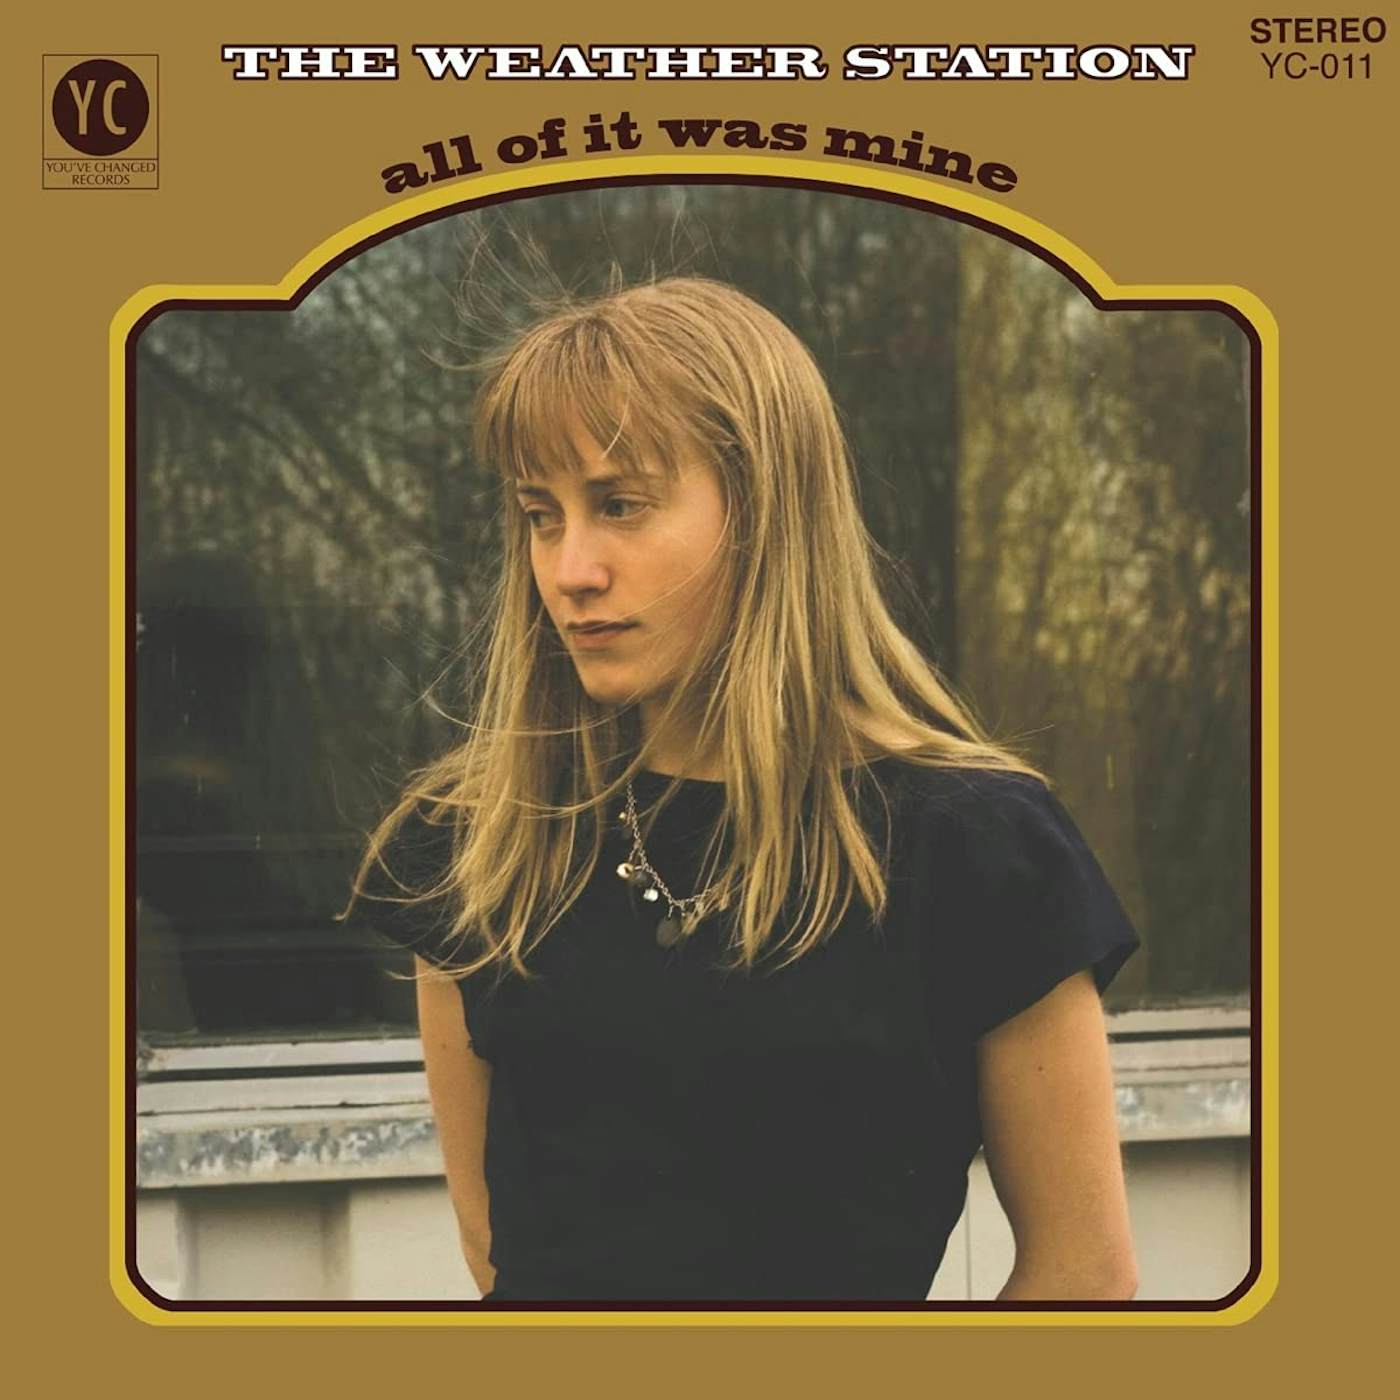 The Weather Station ALL OF IT WAS MINE CD